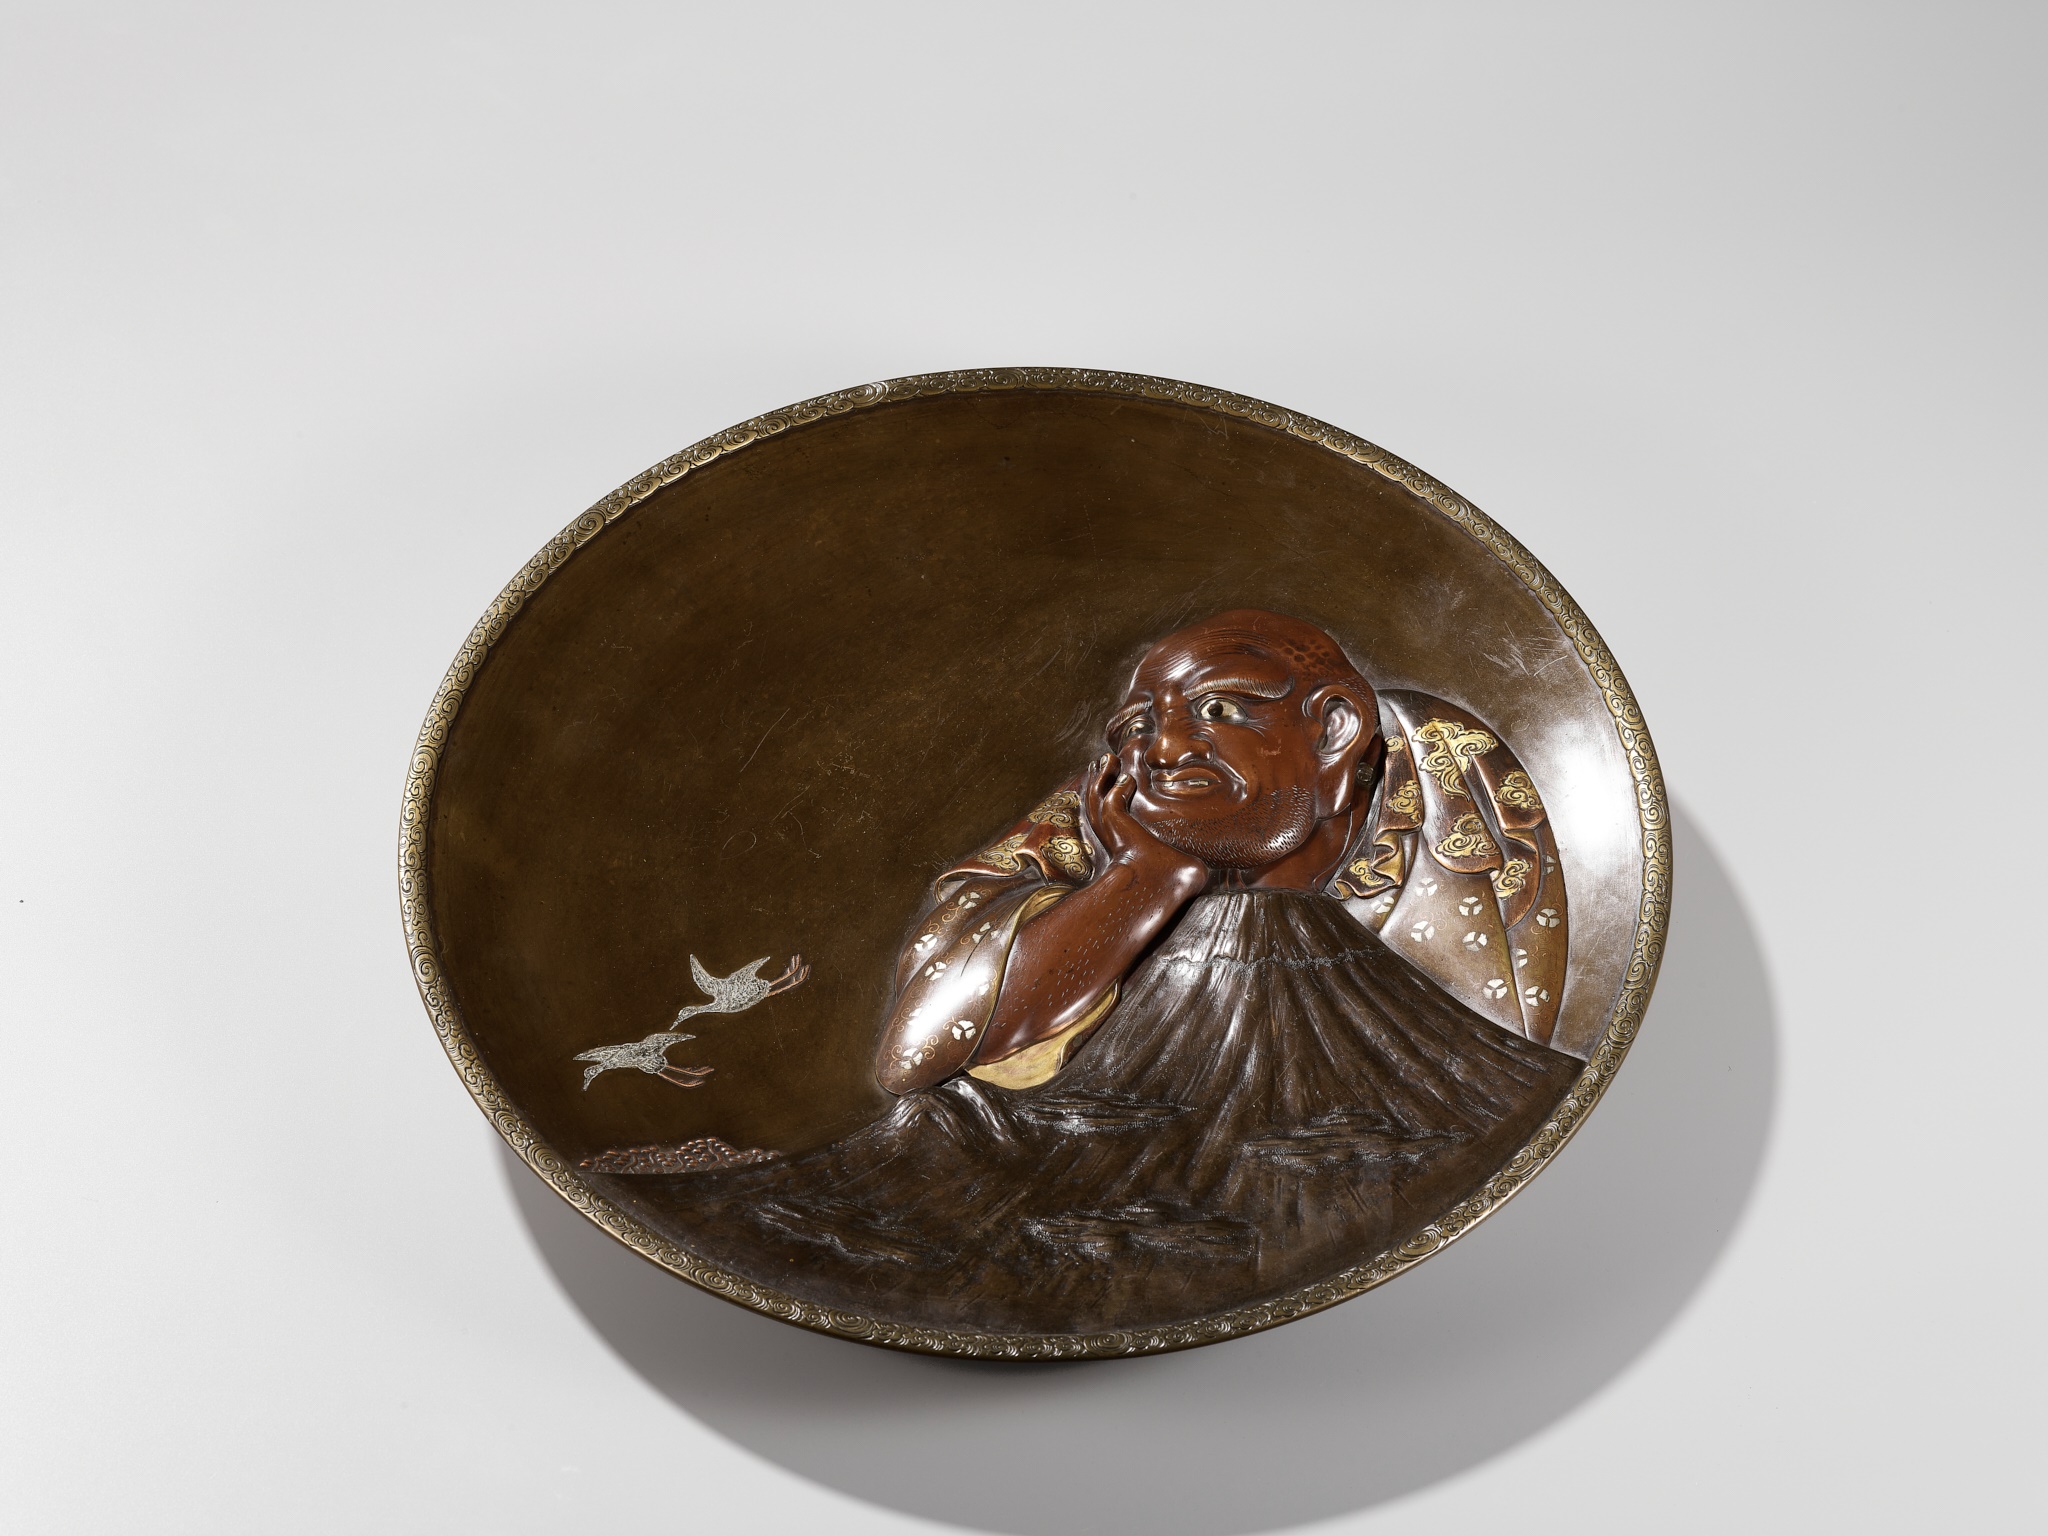 A LARGE AND IMPRESSIVE MIXED METAL DISH DEPICTING WASOBEI AND MOUNT FUJI - Image 6 of 6